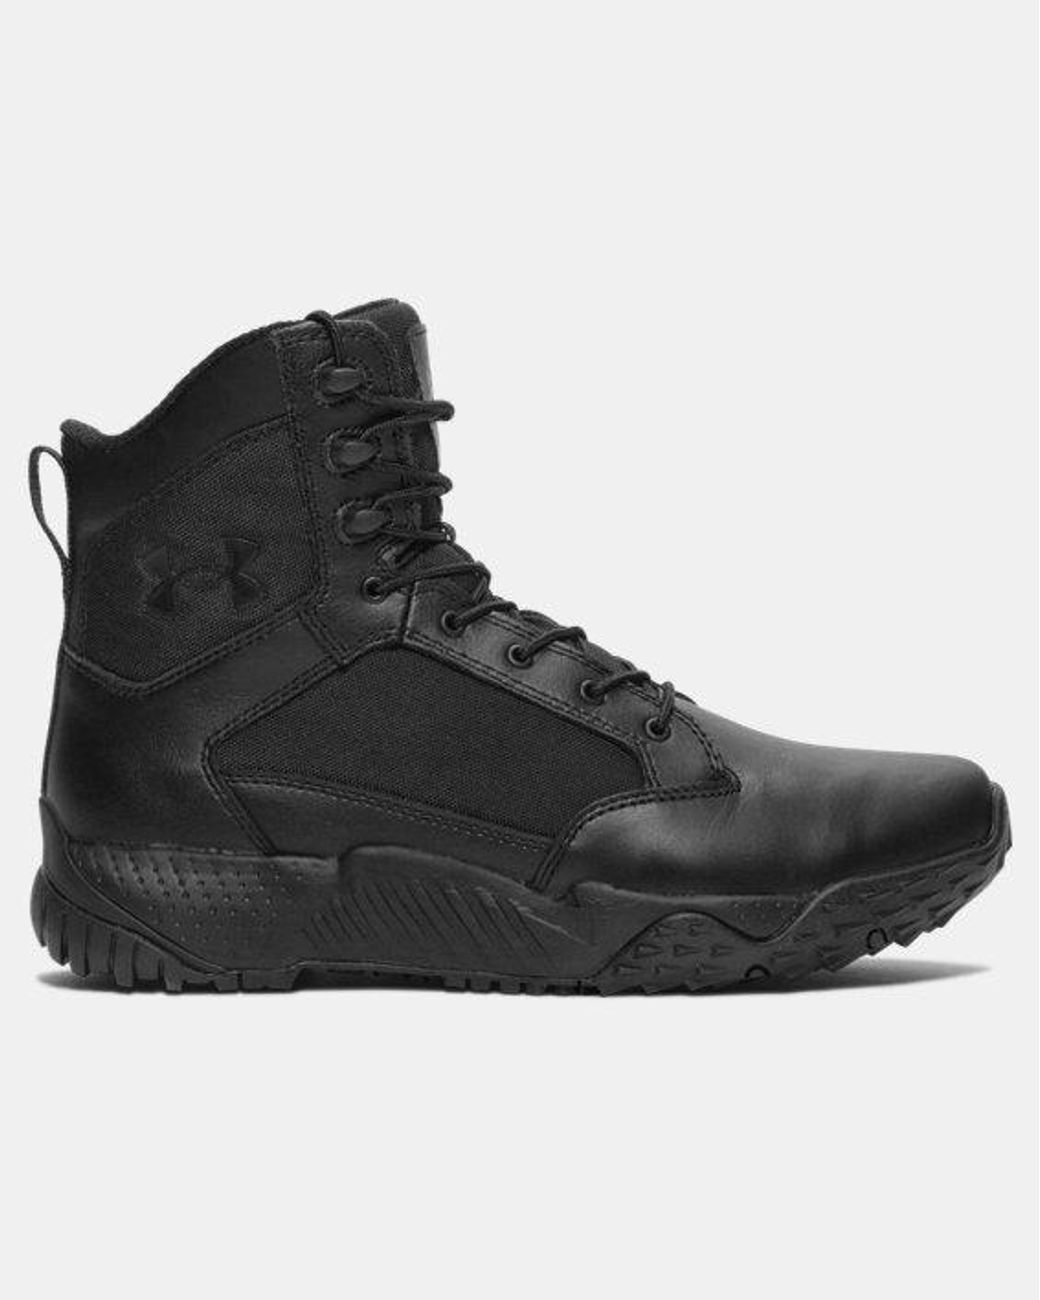 Under Armour Ua Stellar Tactical Side-zip Boots In Black